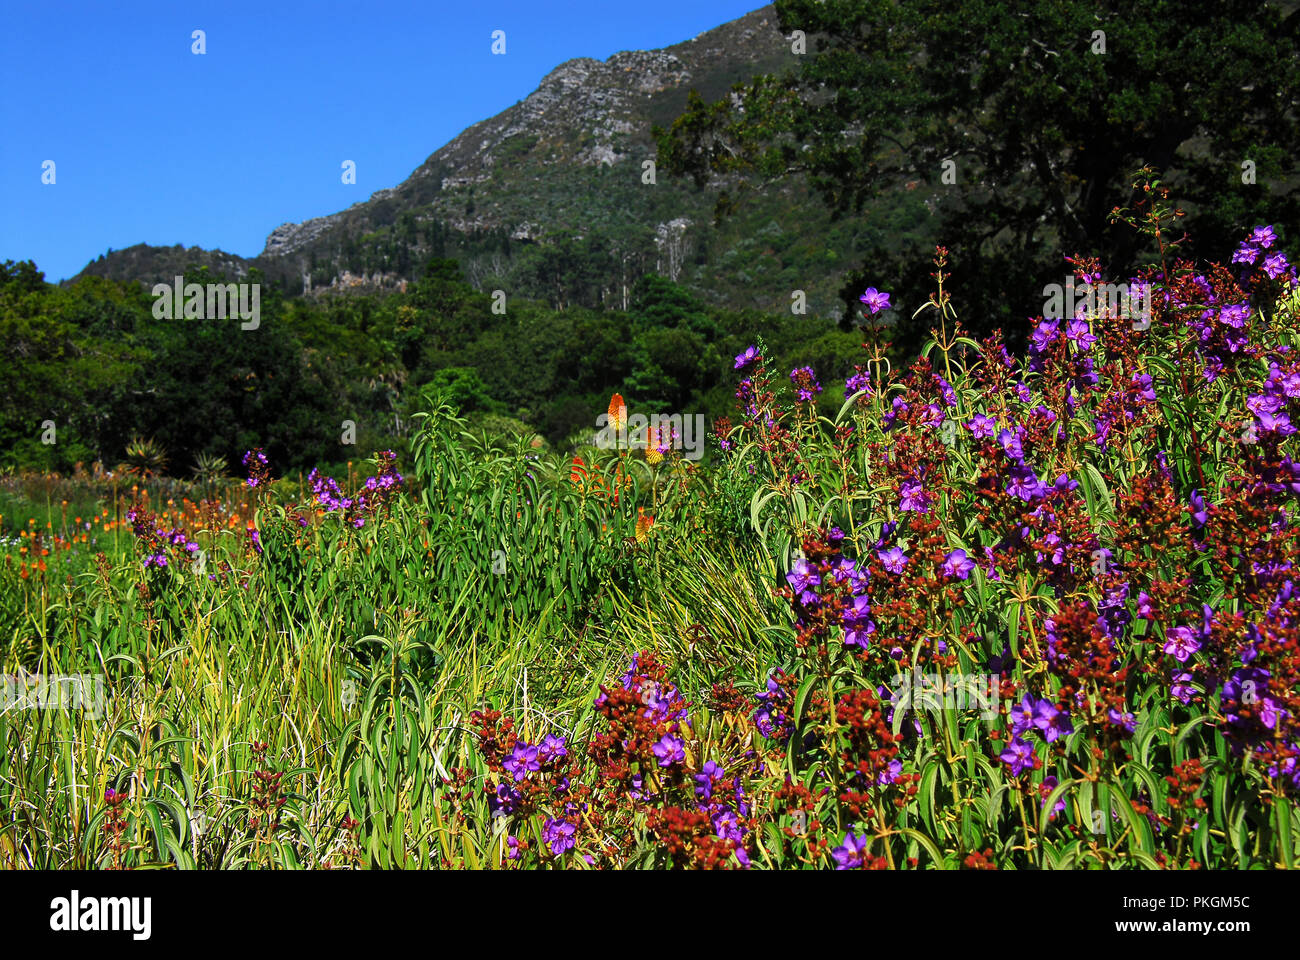 A beautiful view of the colorful flowers and high cliffs surrounding the wonderful Kirstenbosch National Botanical Garden in Cape Town, South Africa Stock Photo